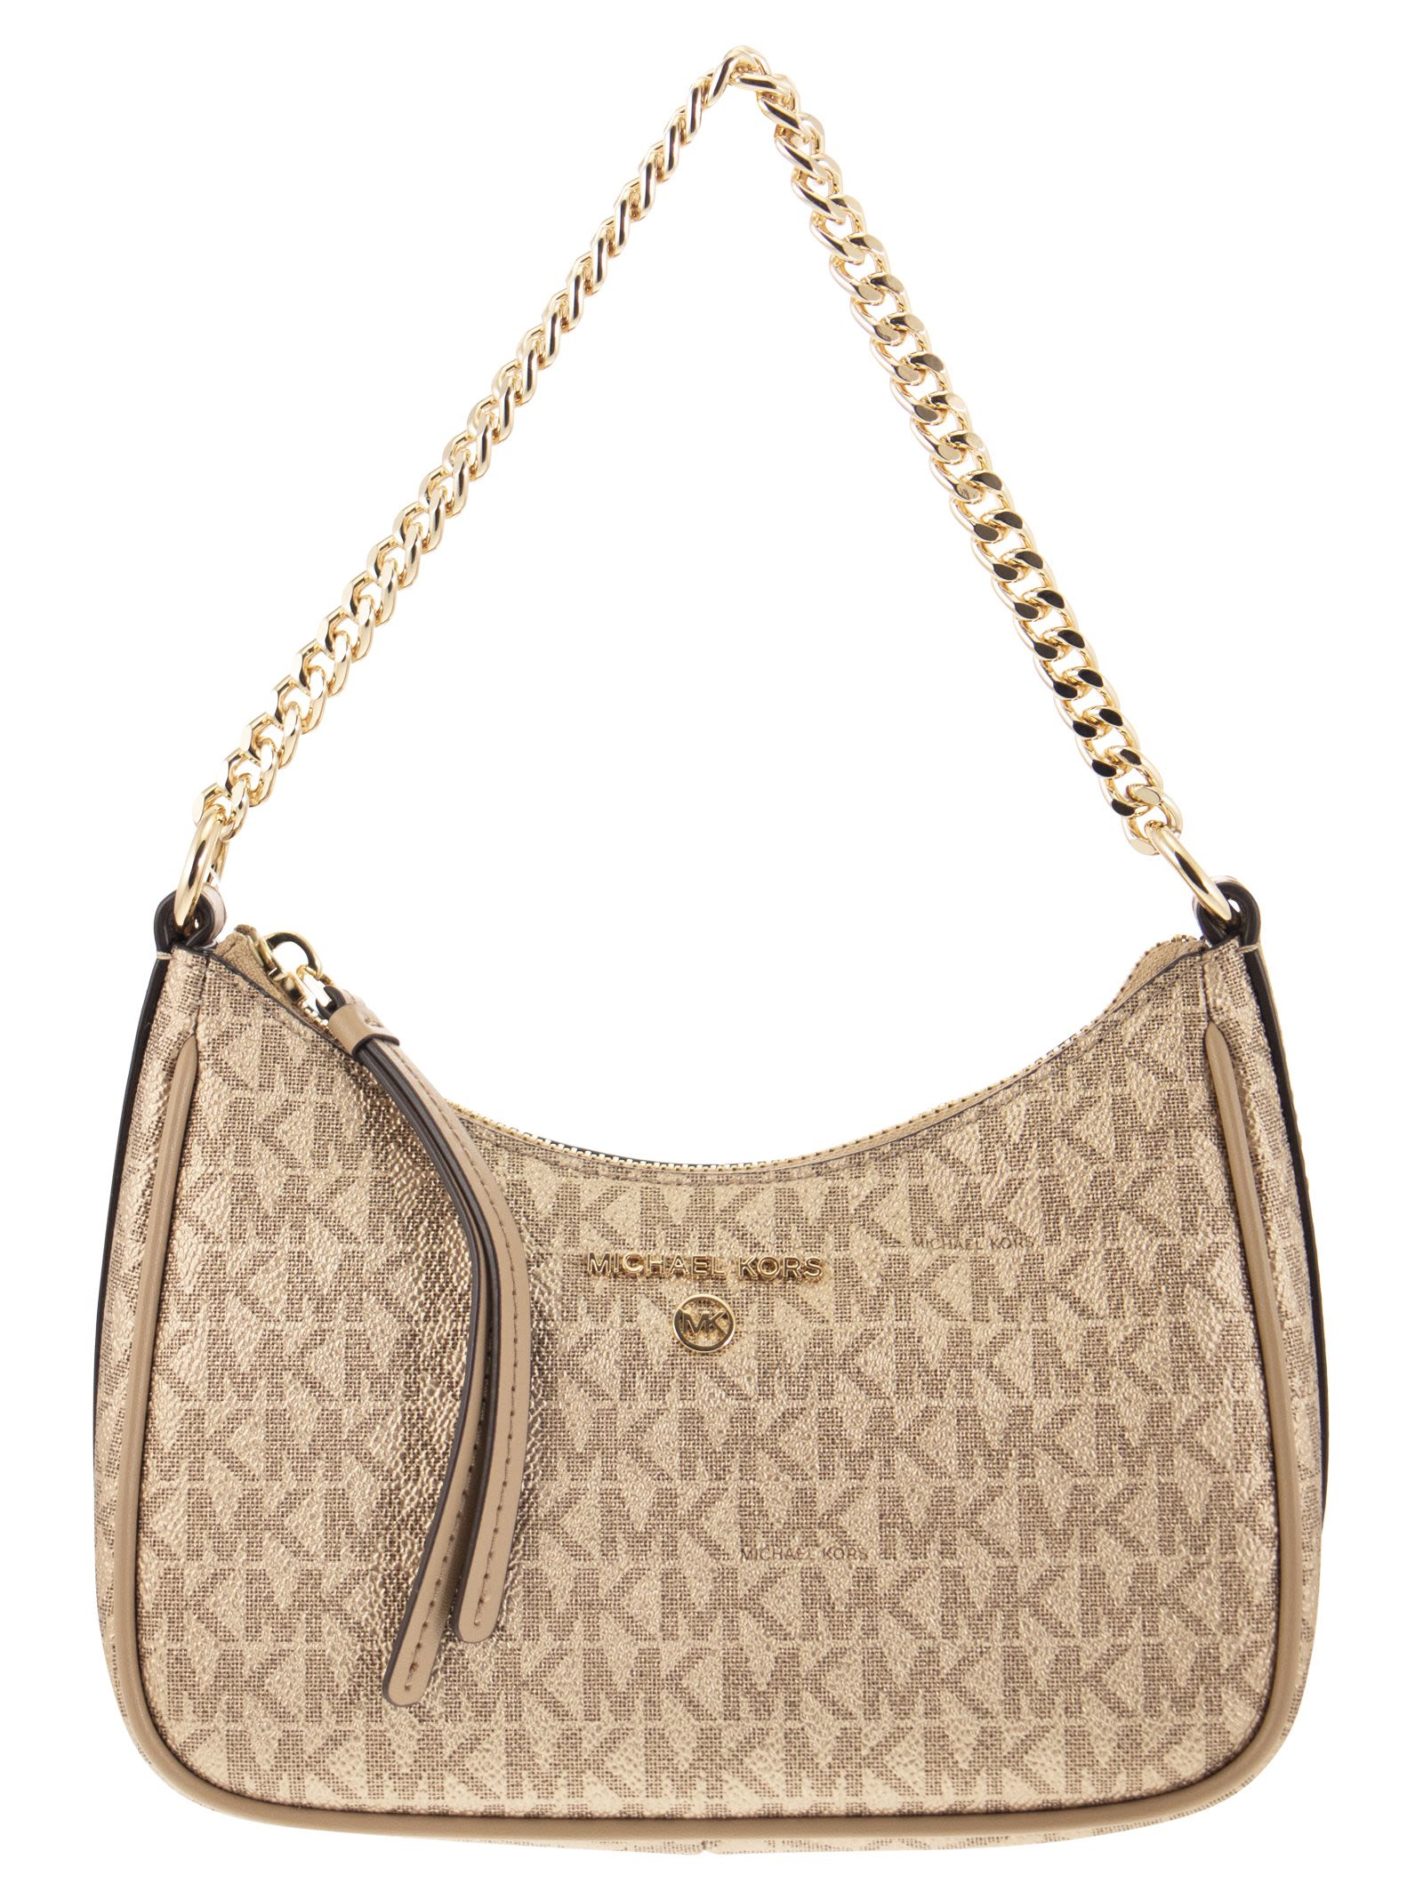 Shop Michael Kors Casual Style Canvas Chain Elegant Style Logo Shoulder Bags  (32H1GT9C1B, 32H1GT9C1V) by ALOHAMALL